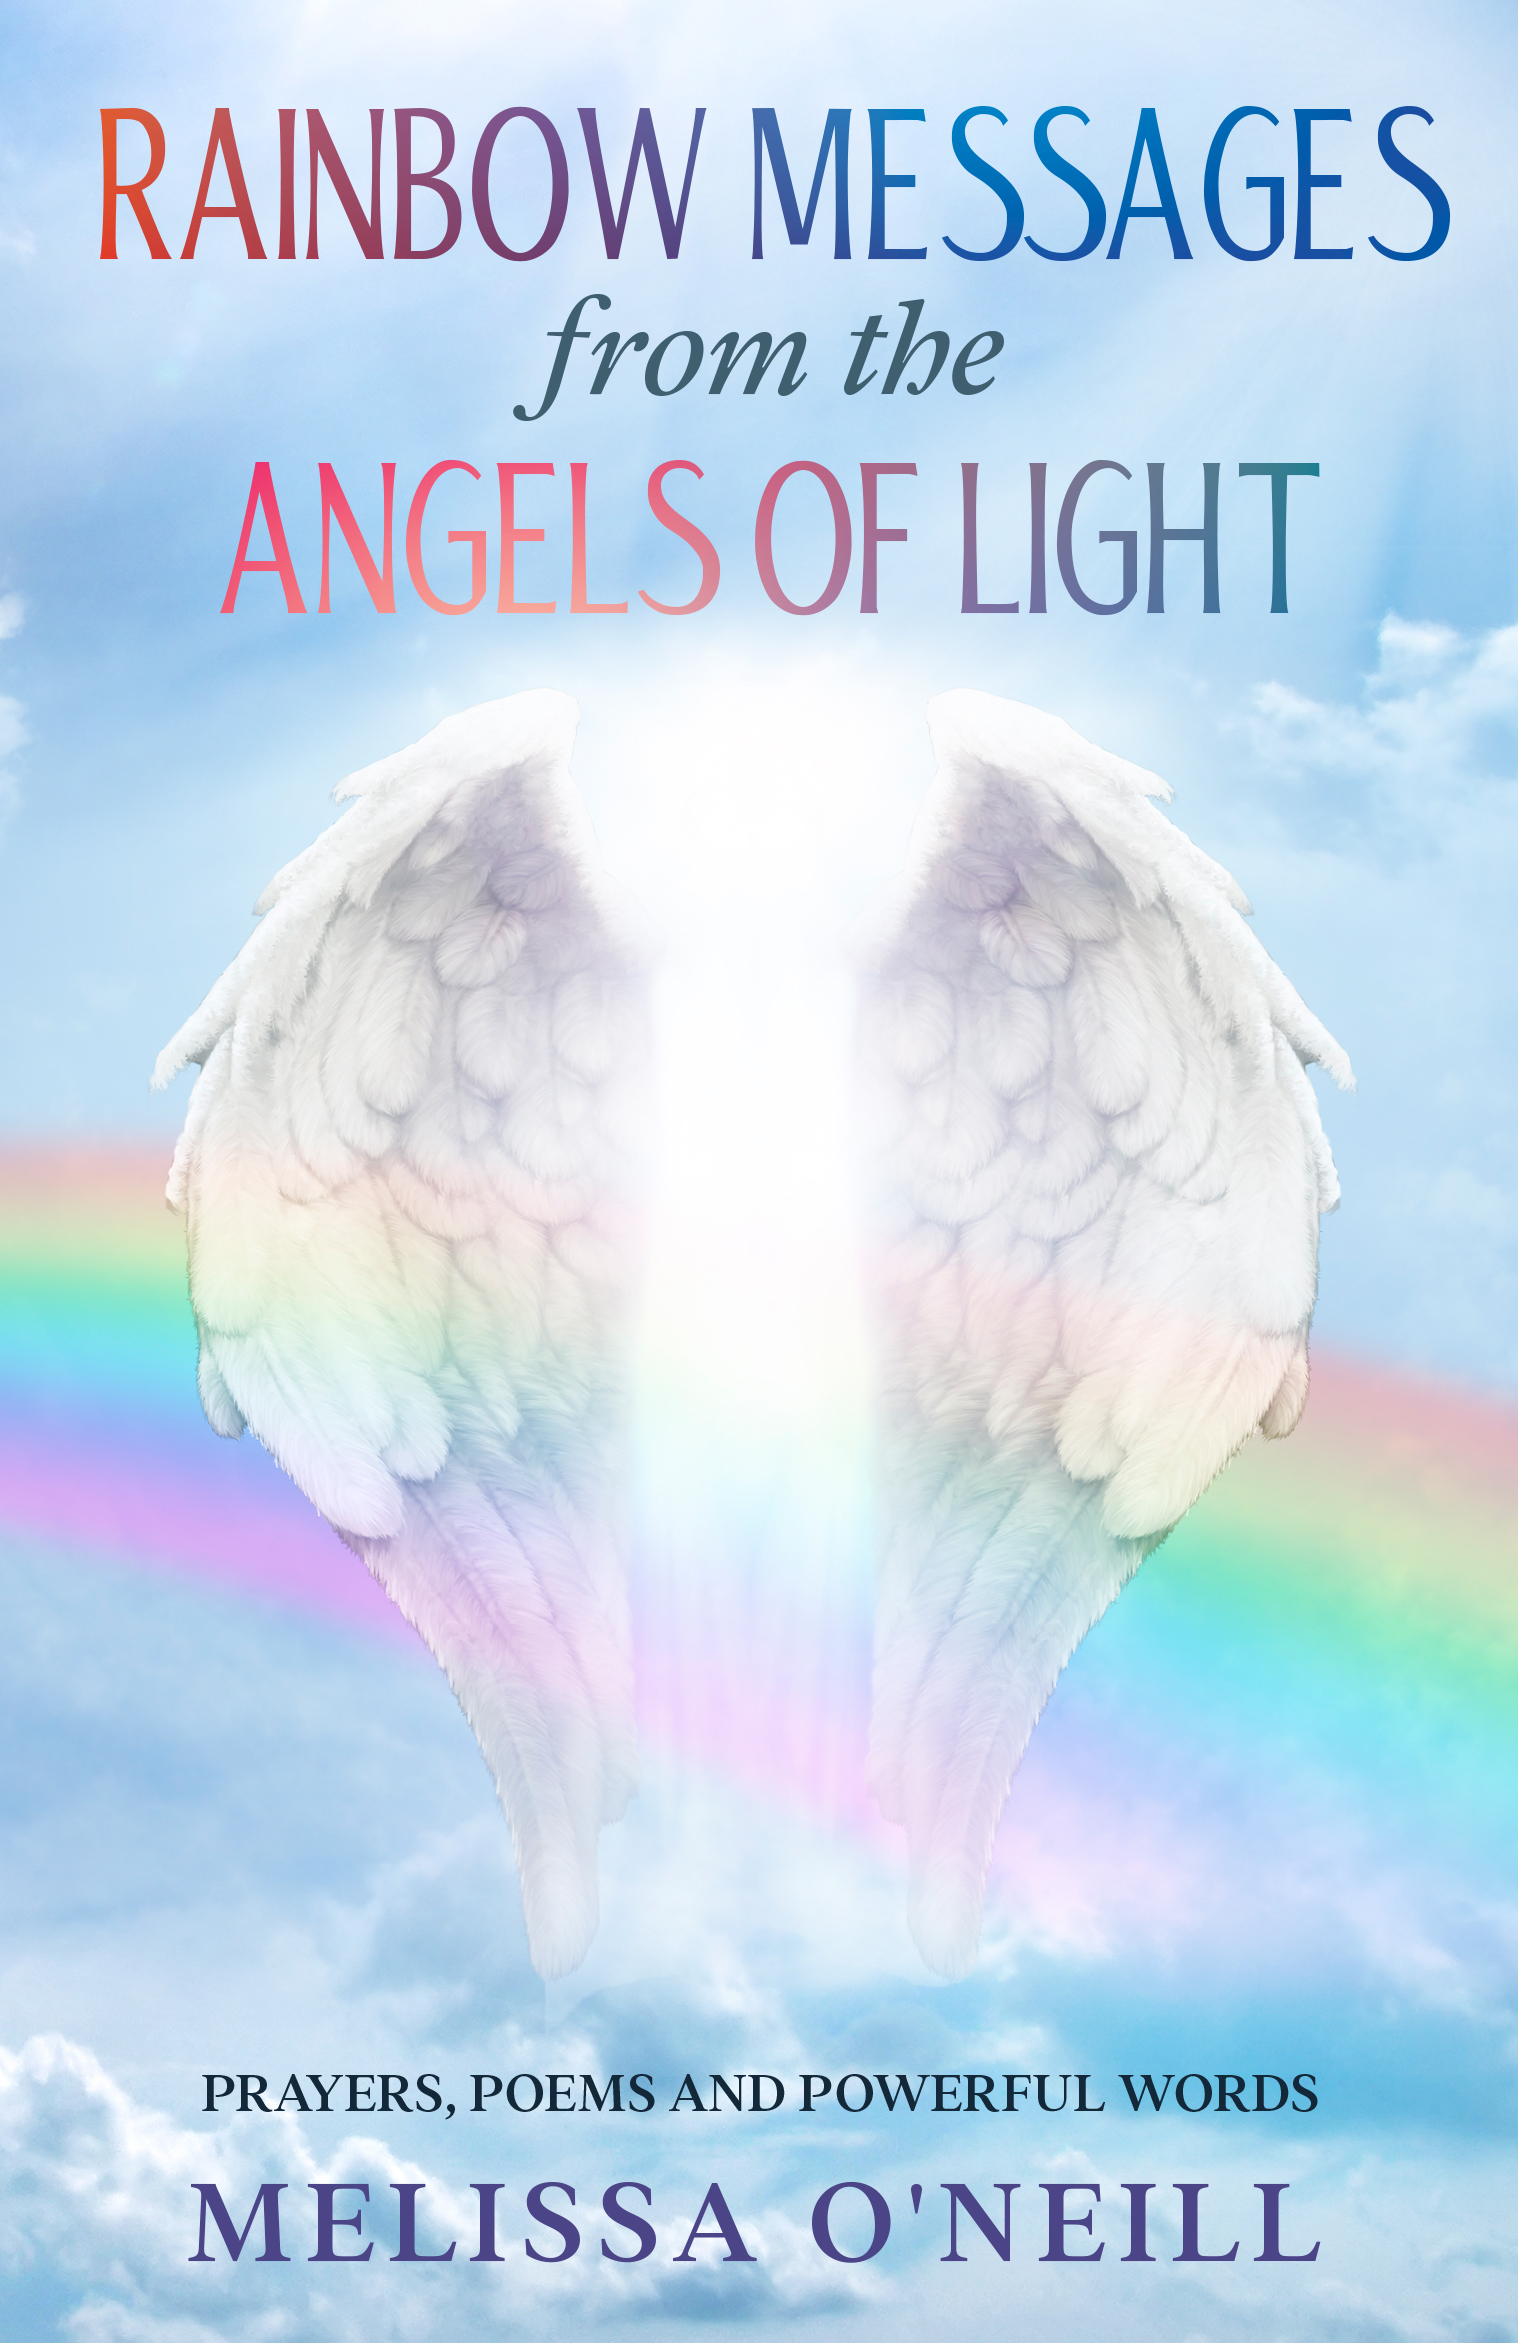 Rainbow Messages from the Angels of Light